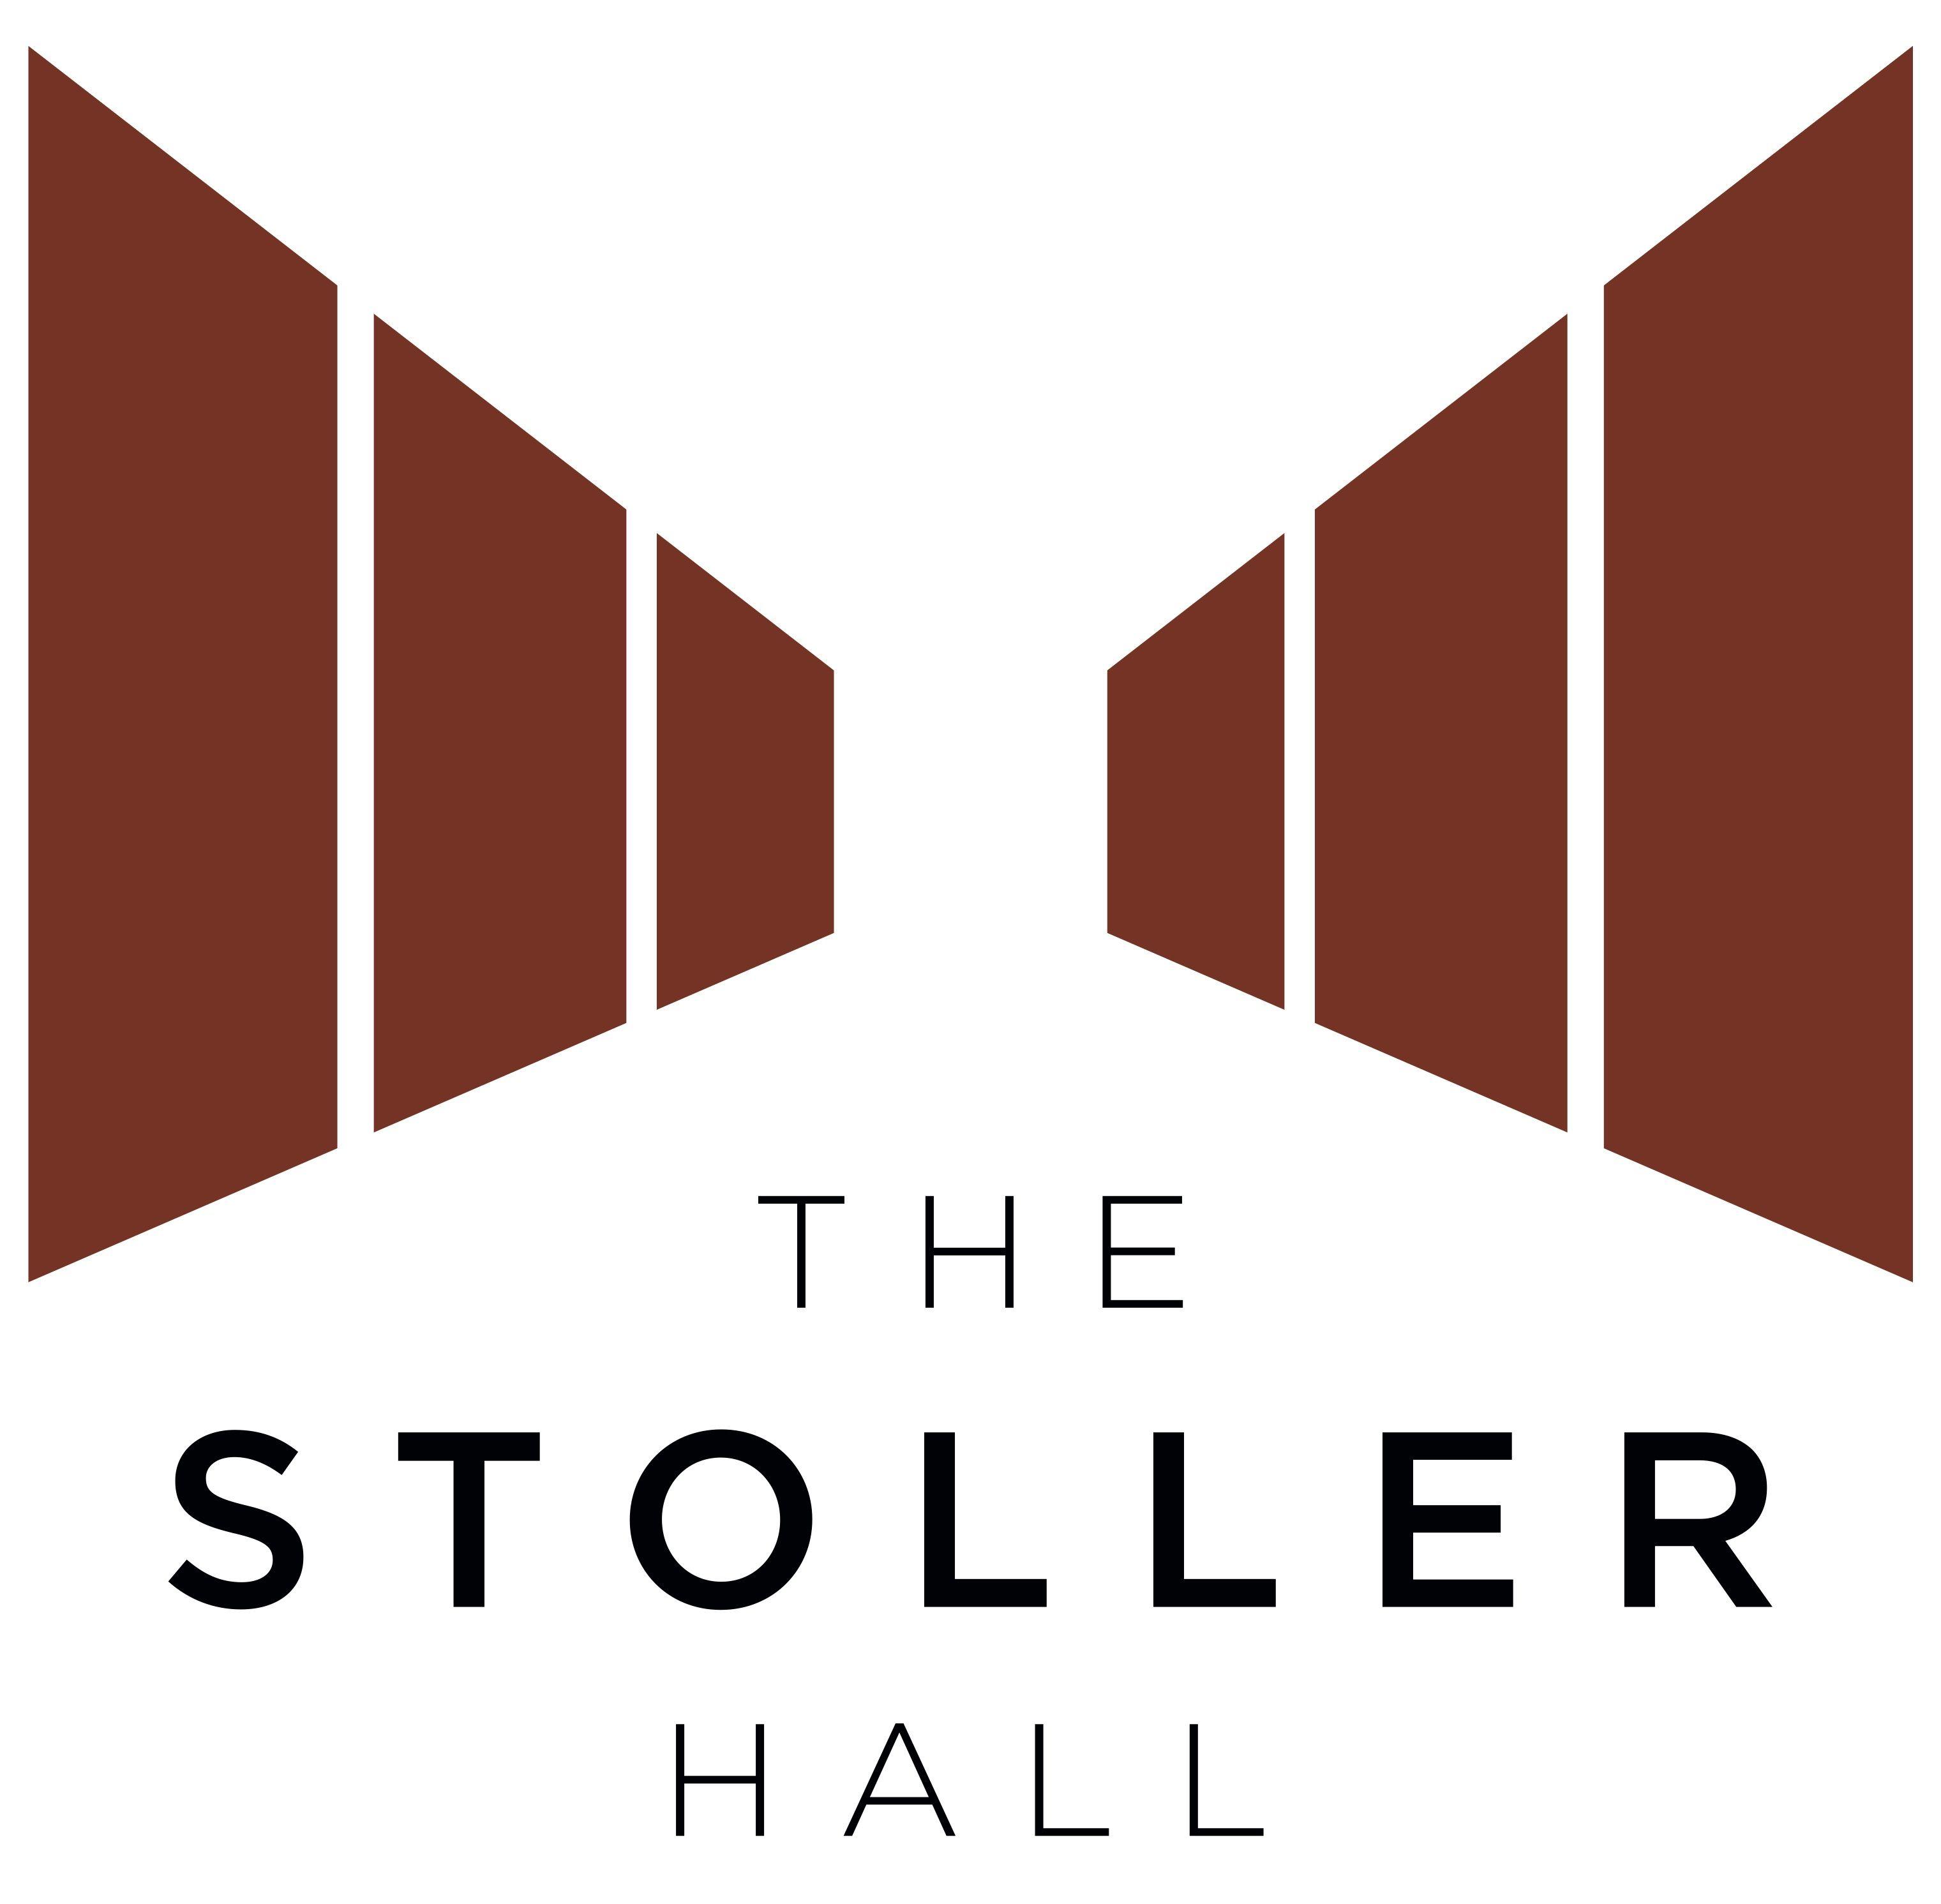 Hall Logo - Resources | The Stoller Hall